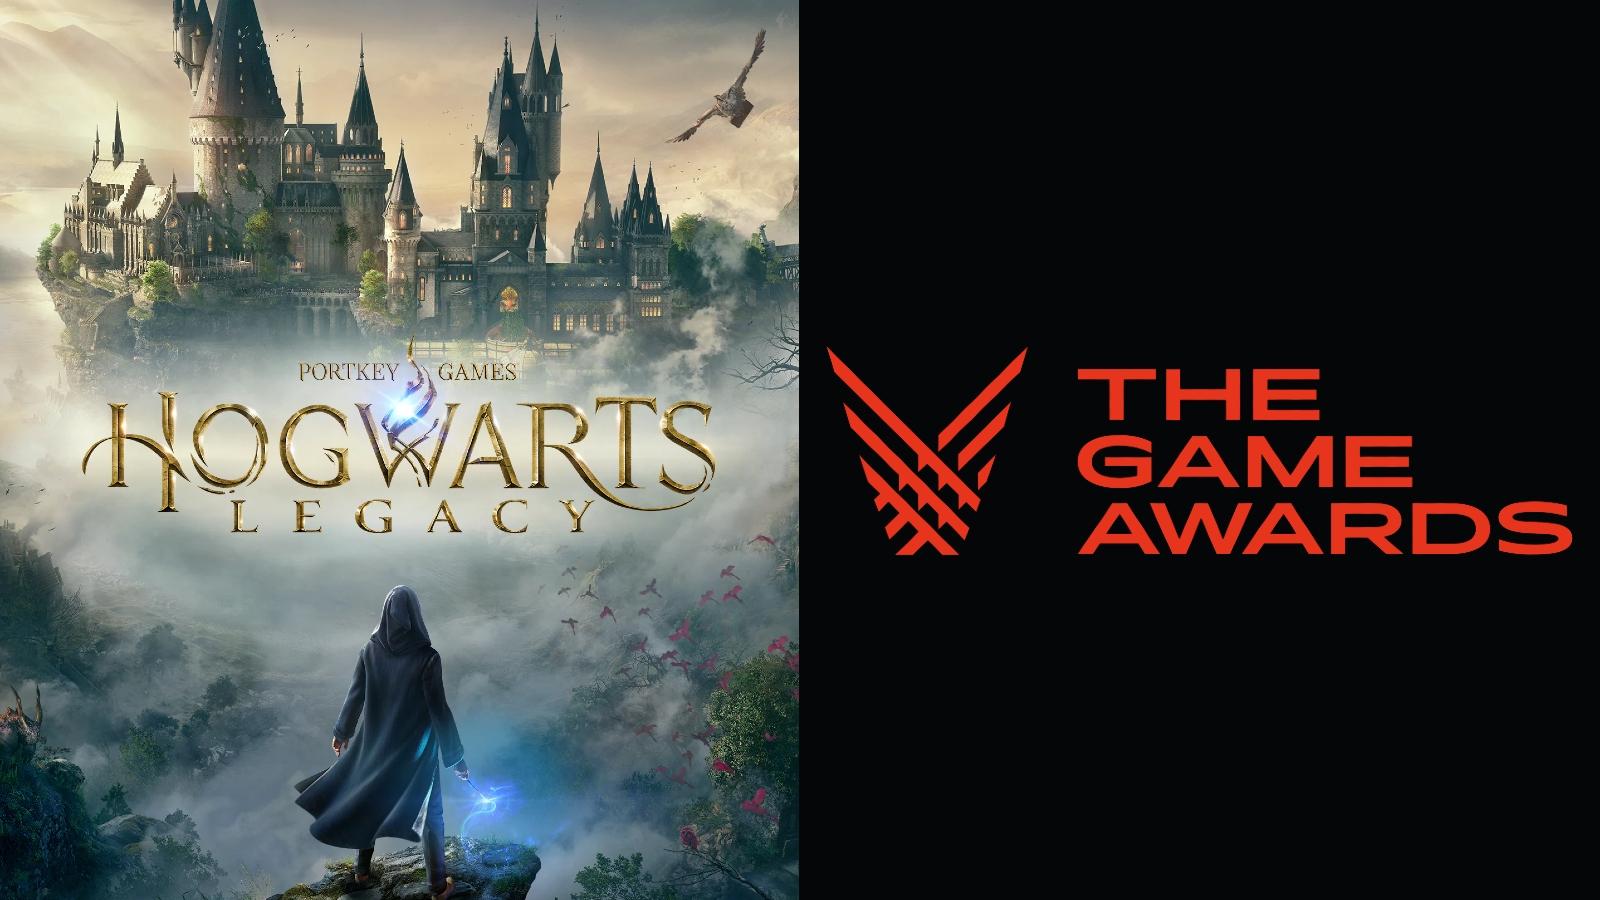 hogwarts legacy cover art with game awards logo